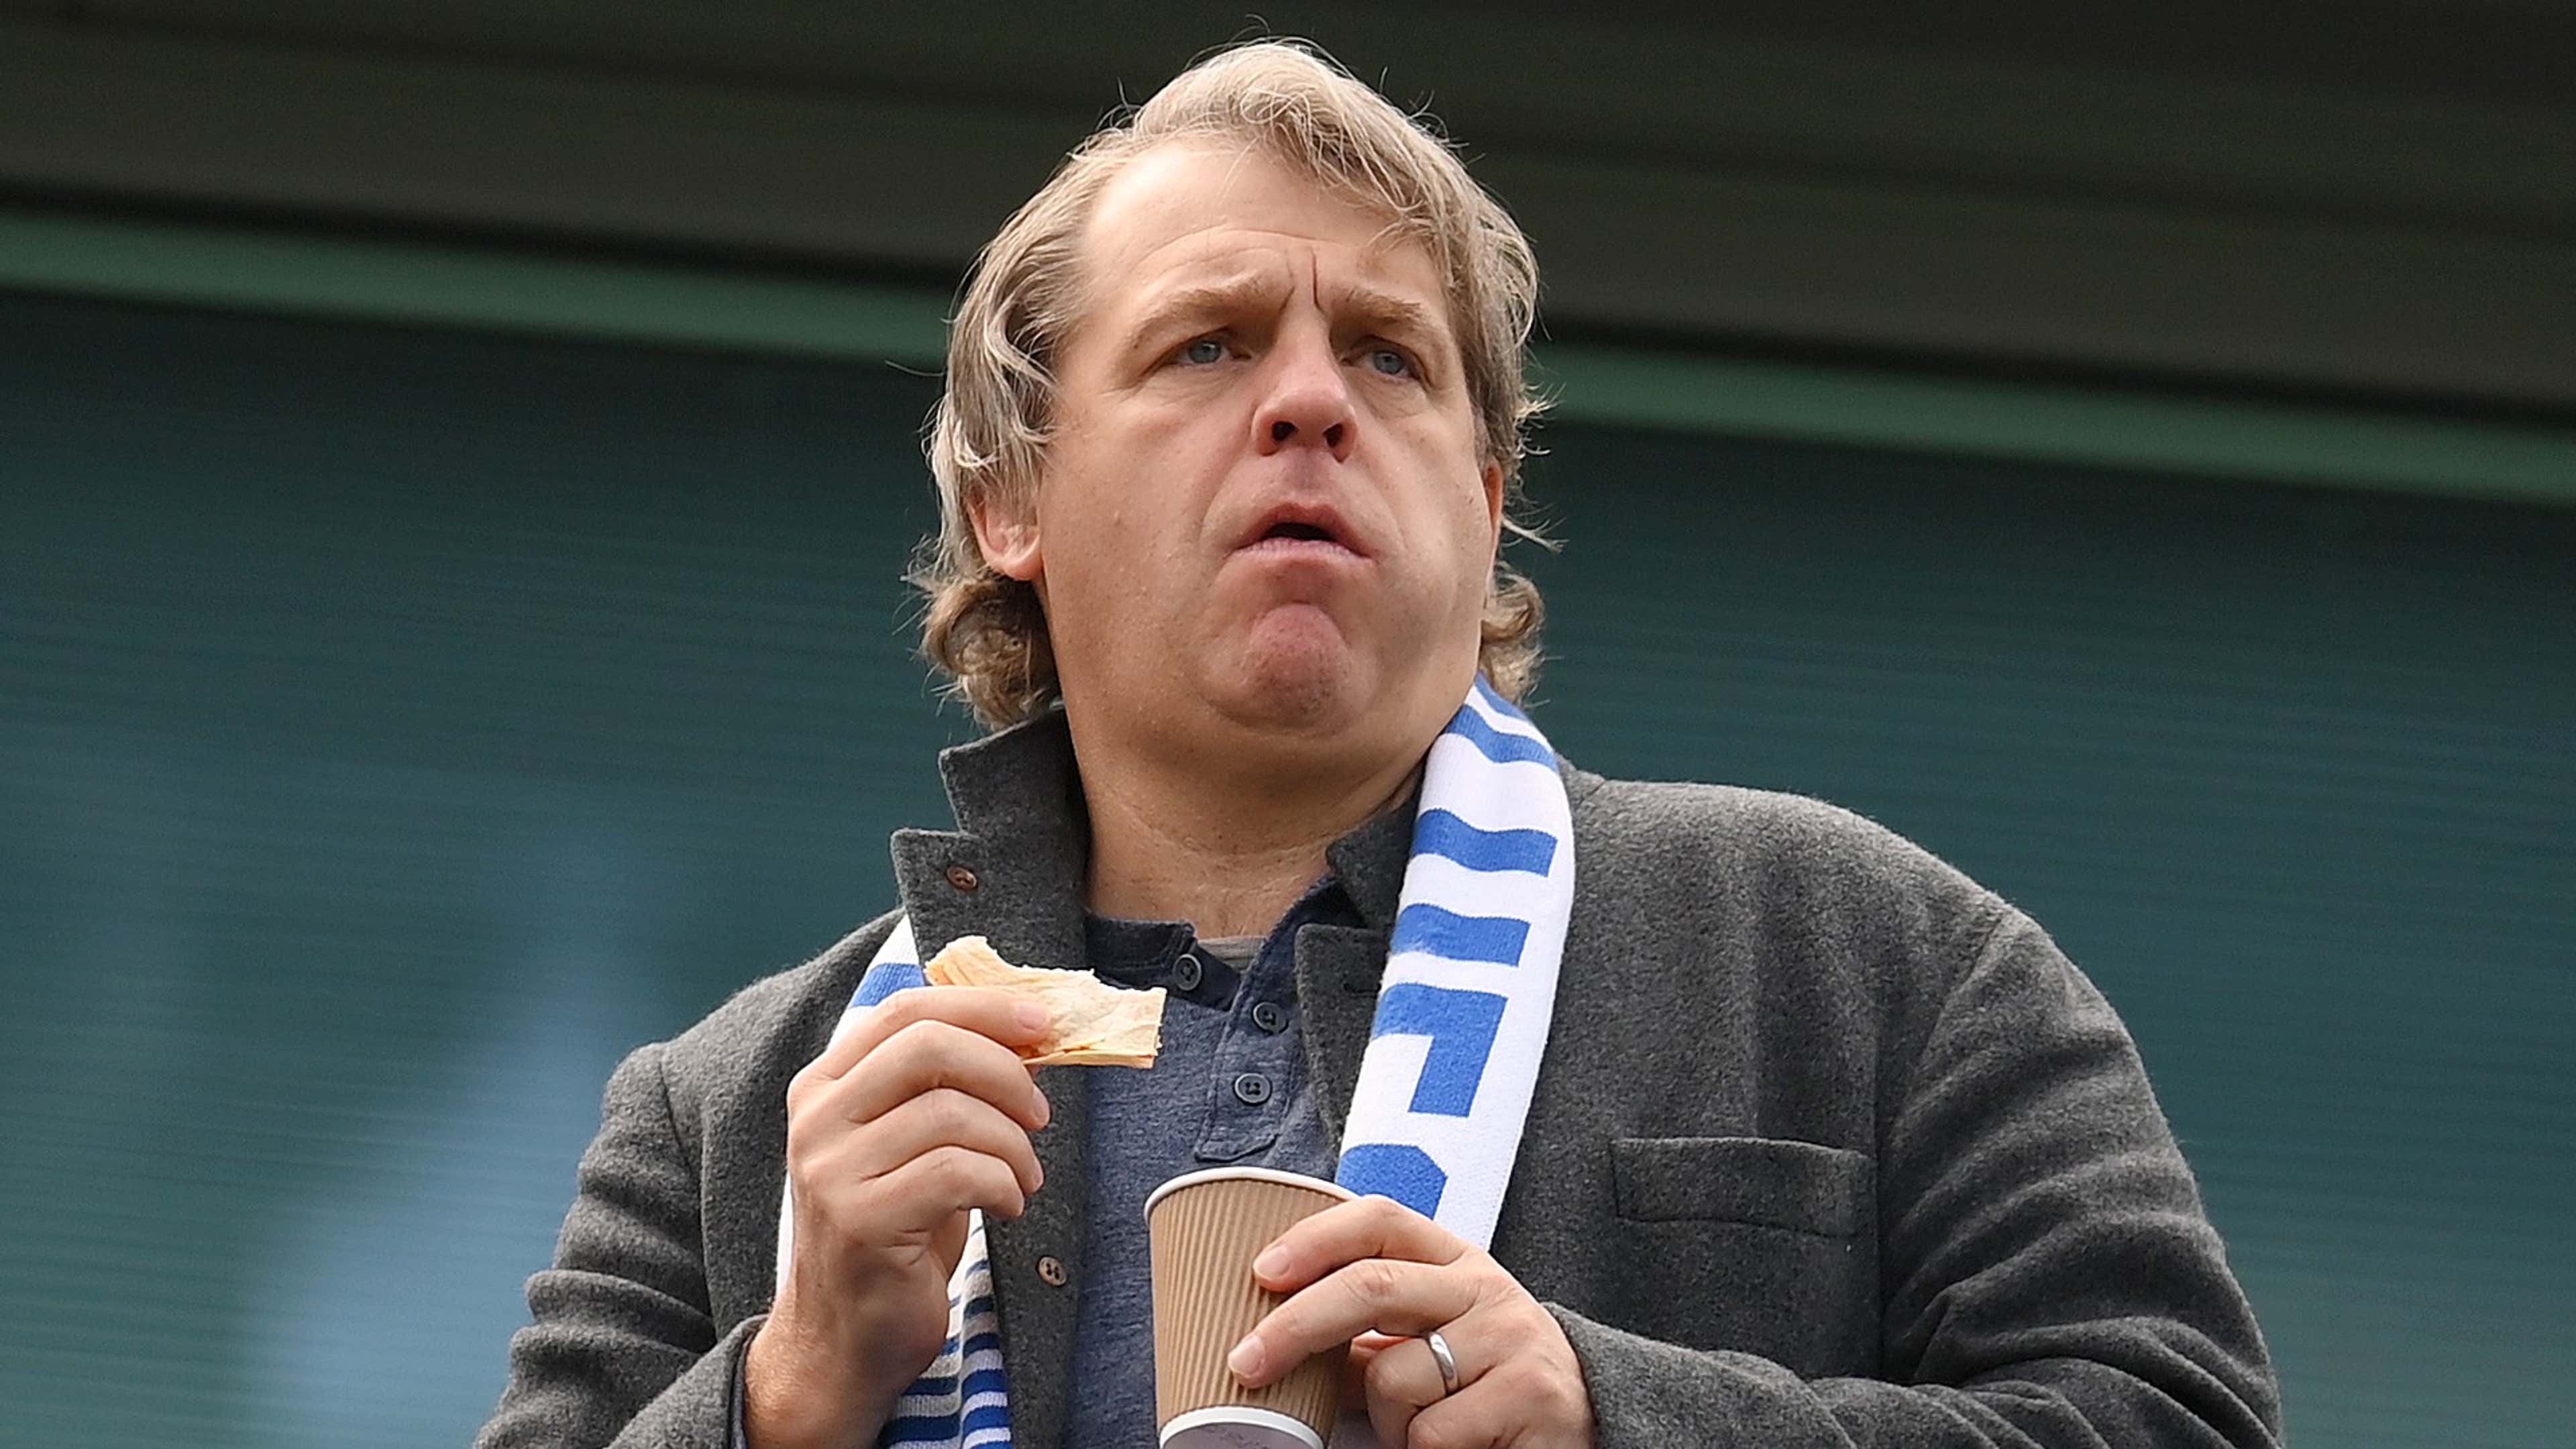 Todd Boehly dialling back Chelsea involvement after disastrous first season  as club co-owner | Goal.com